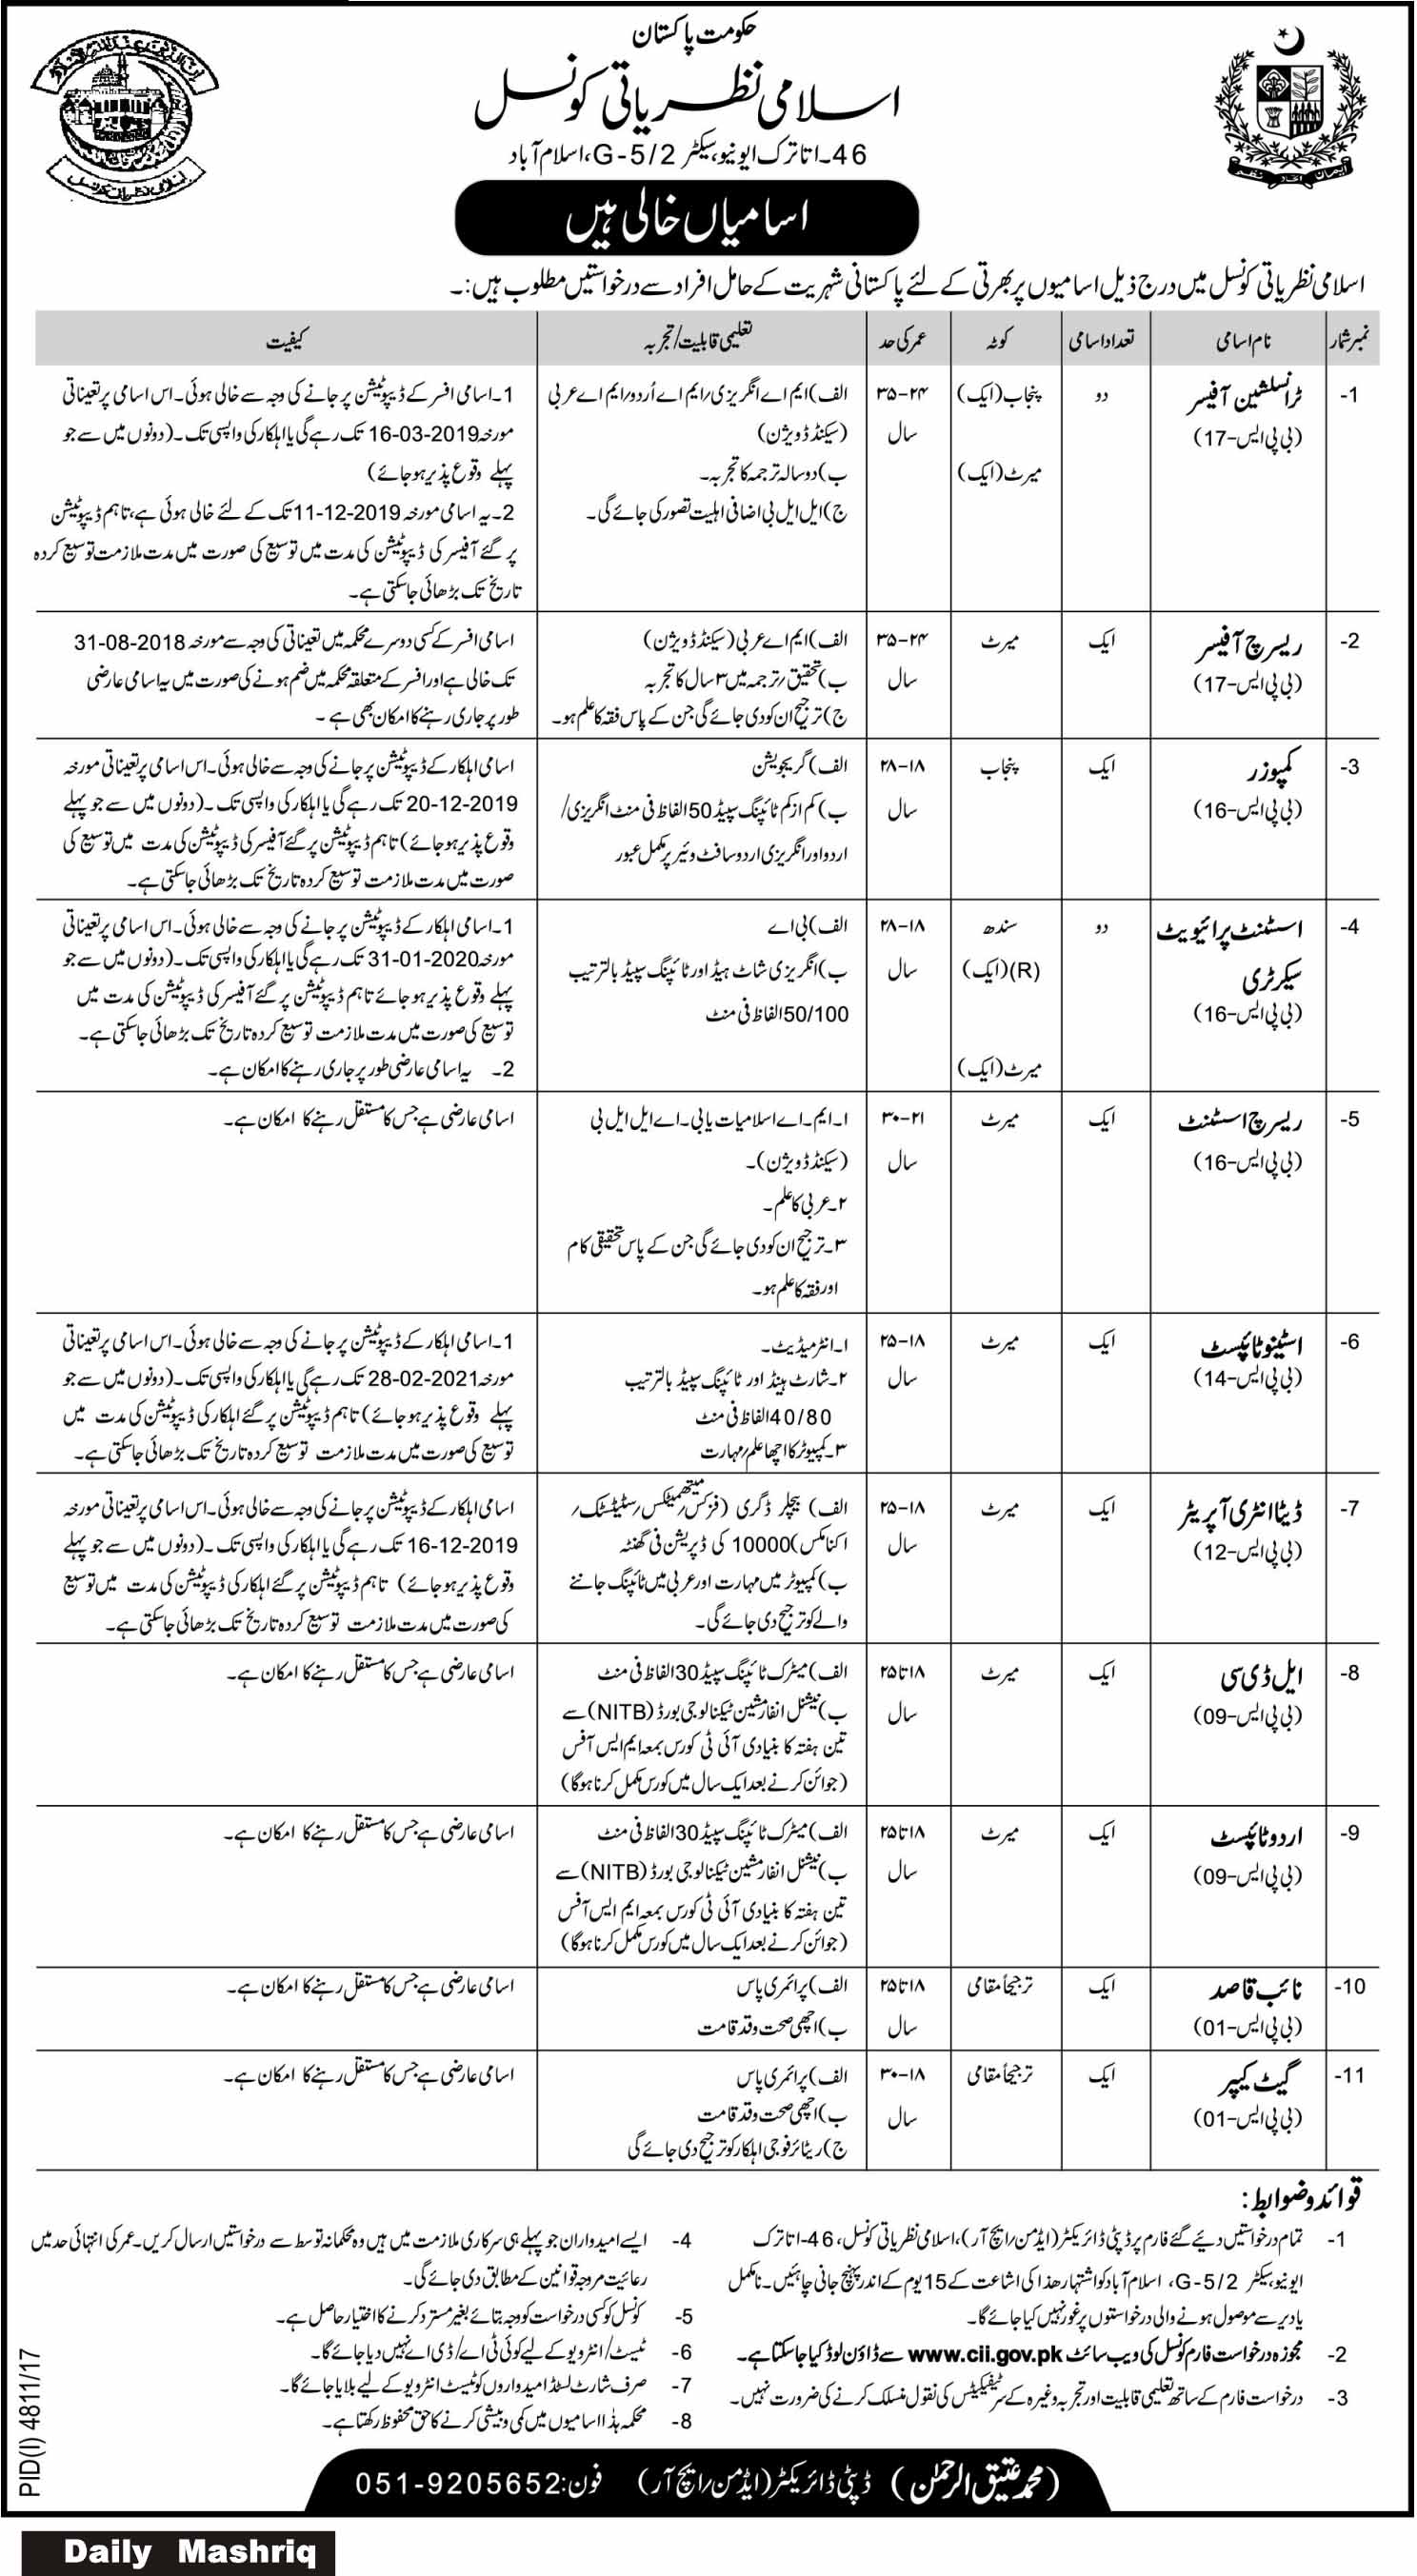 Council of Islamic Ideology 13 Jobs 07 March 2018 Daily Jang Newspaper